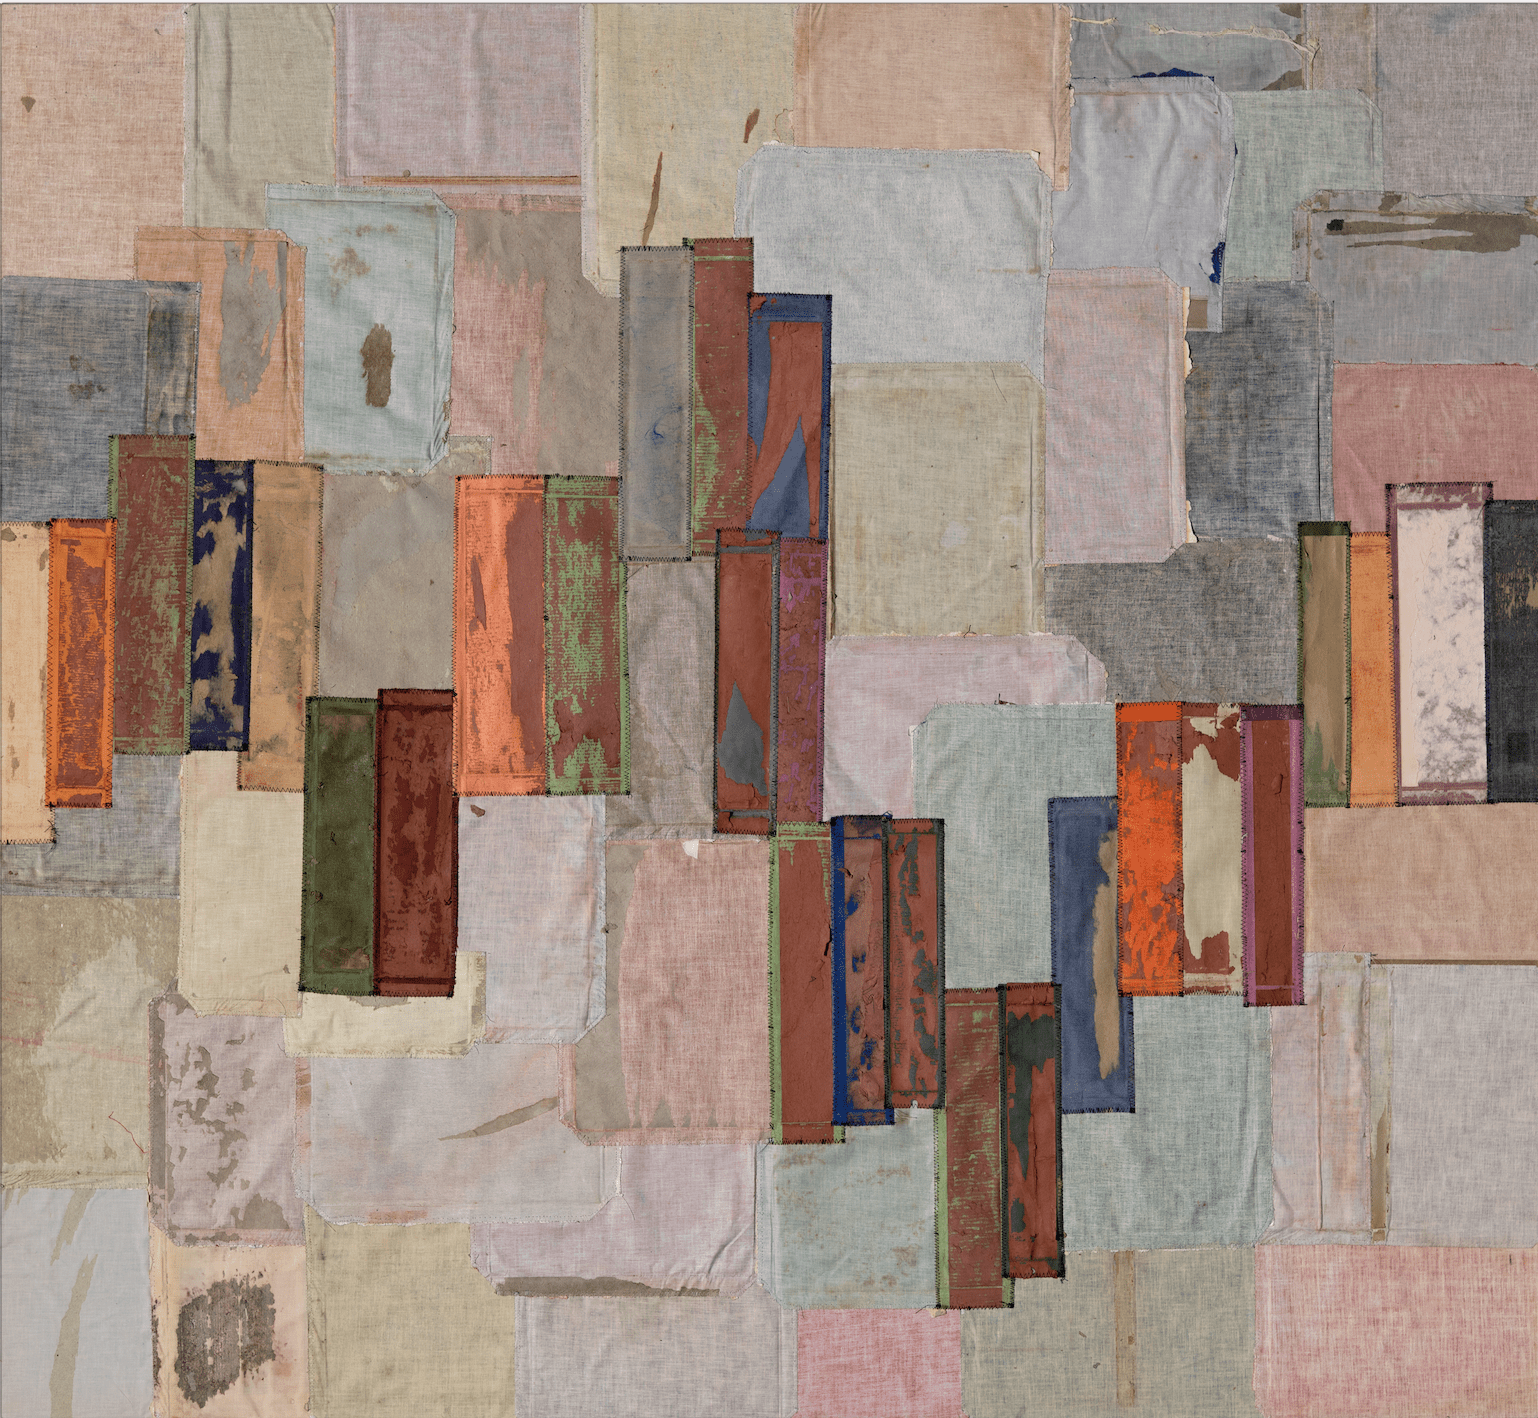 patchwork of fabrics and paints